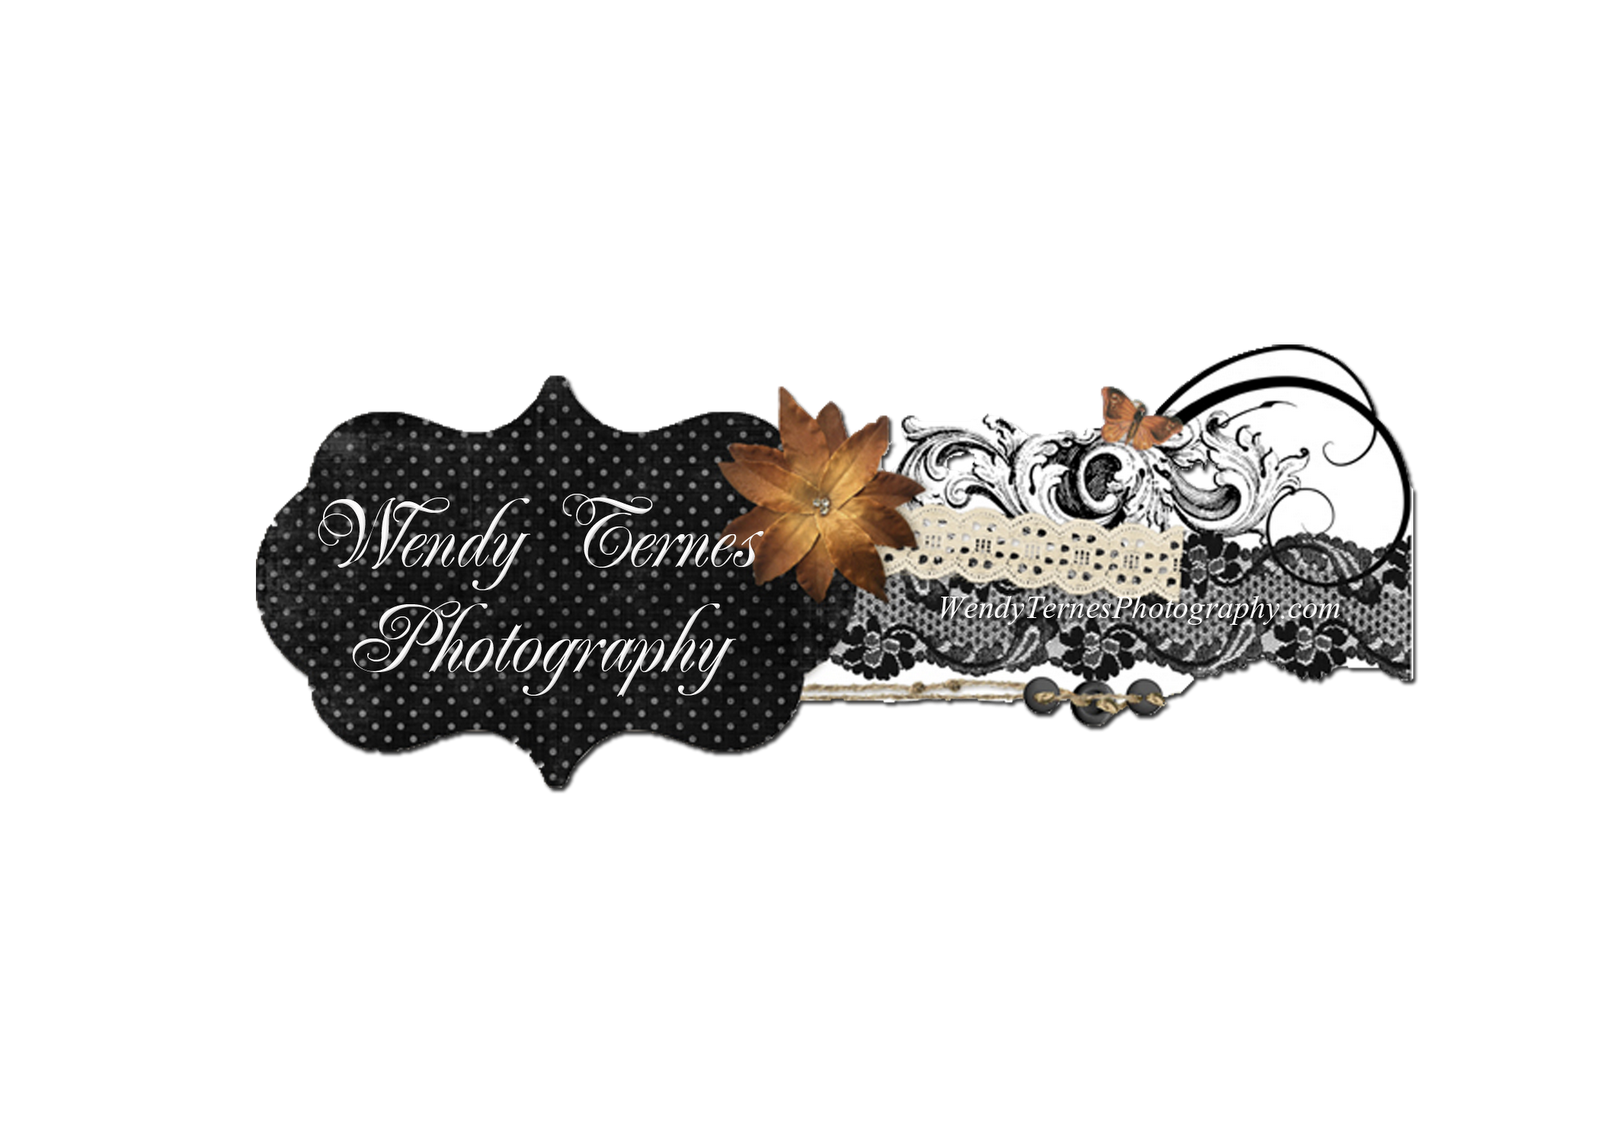 Wendy Ternes Photography